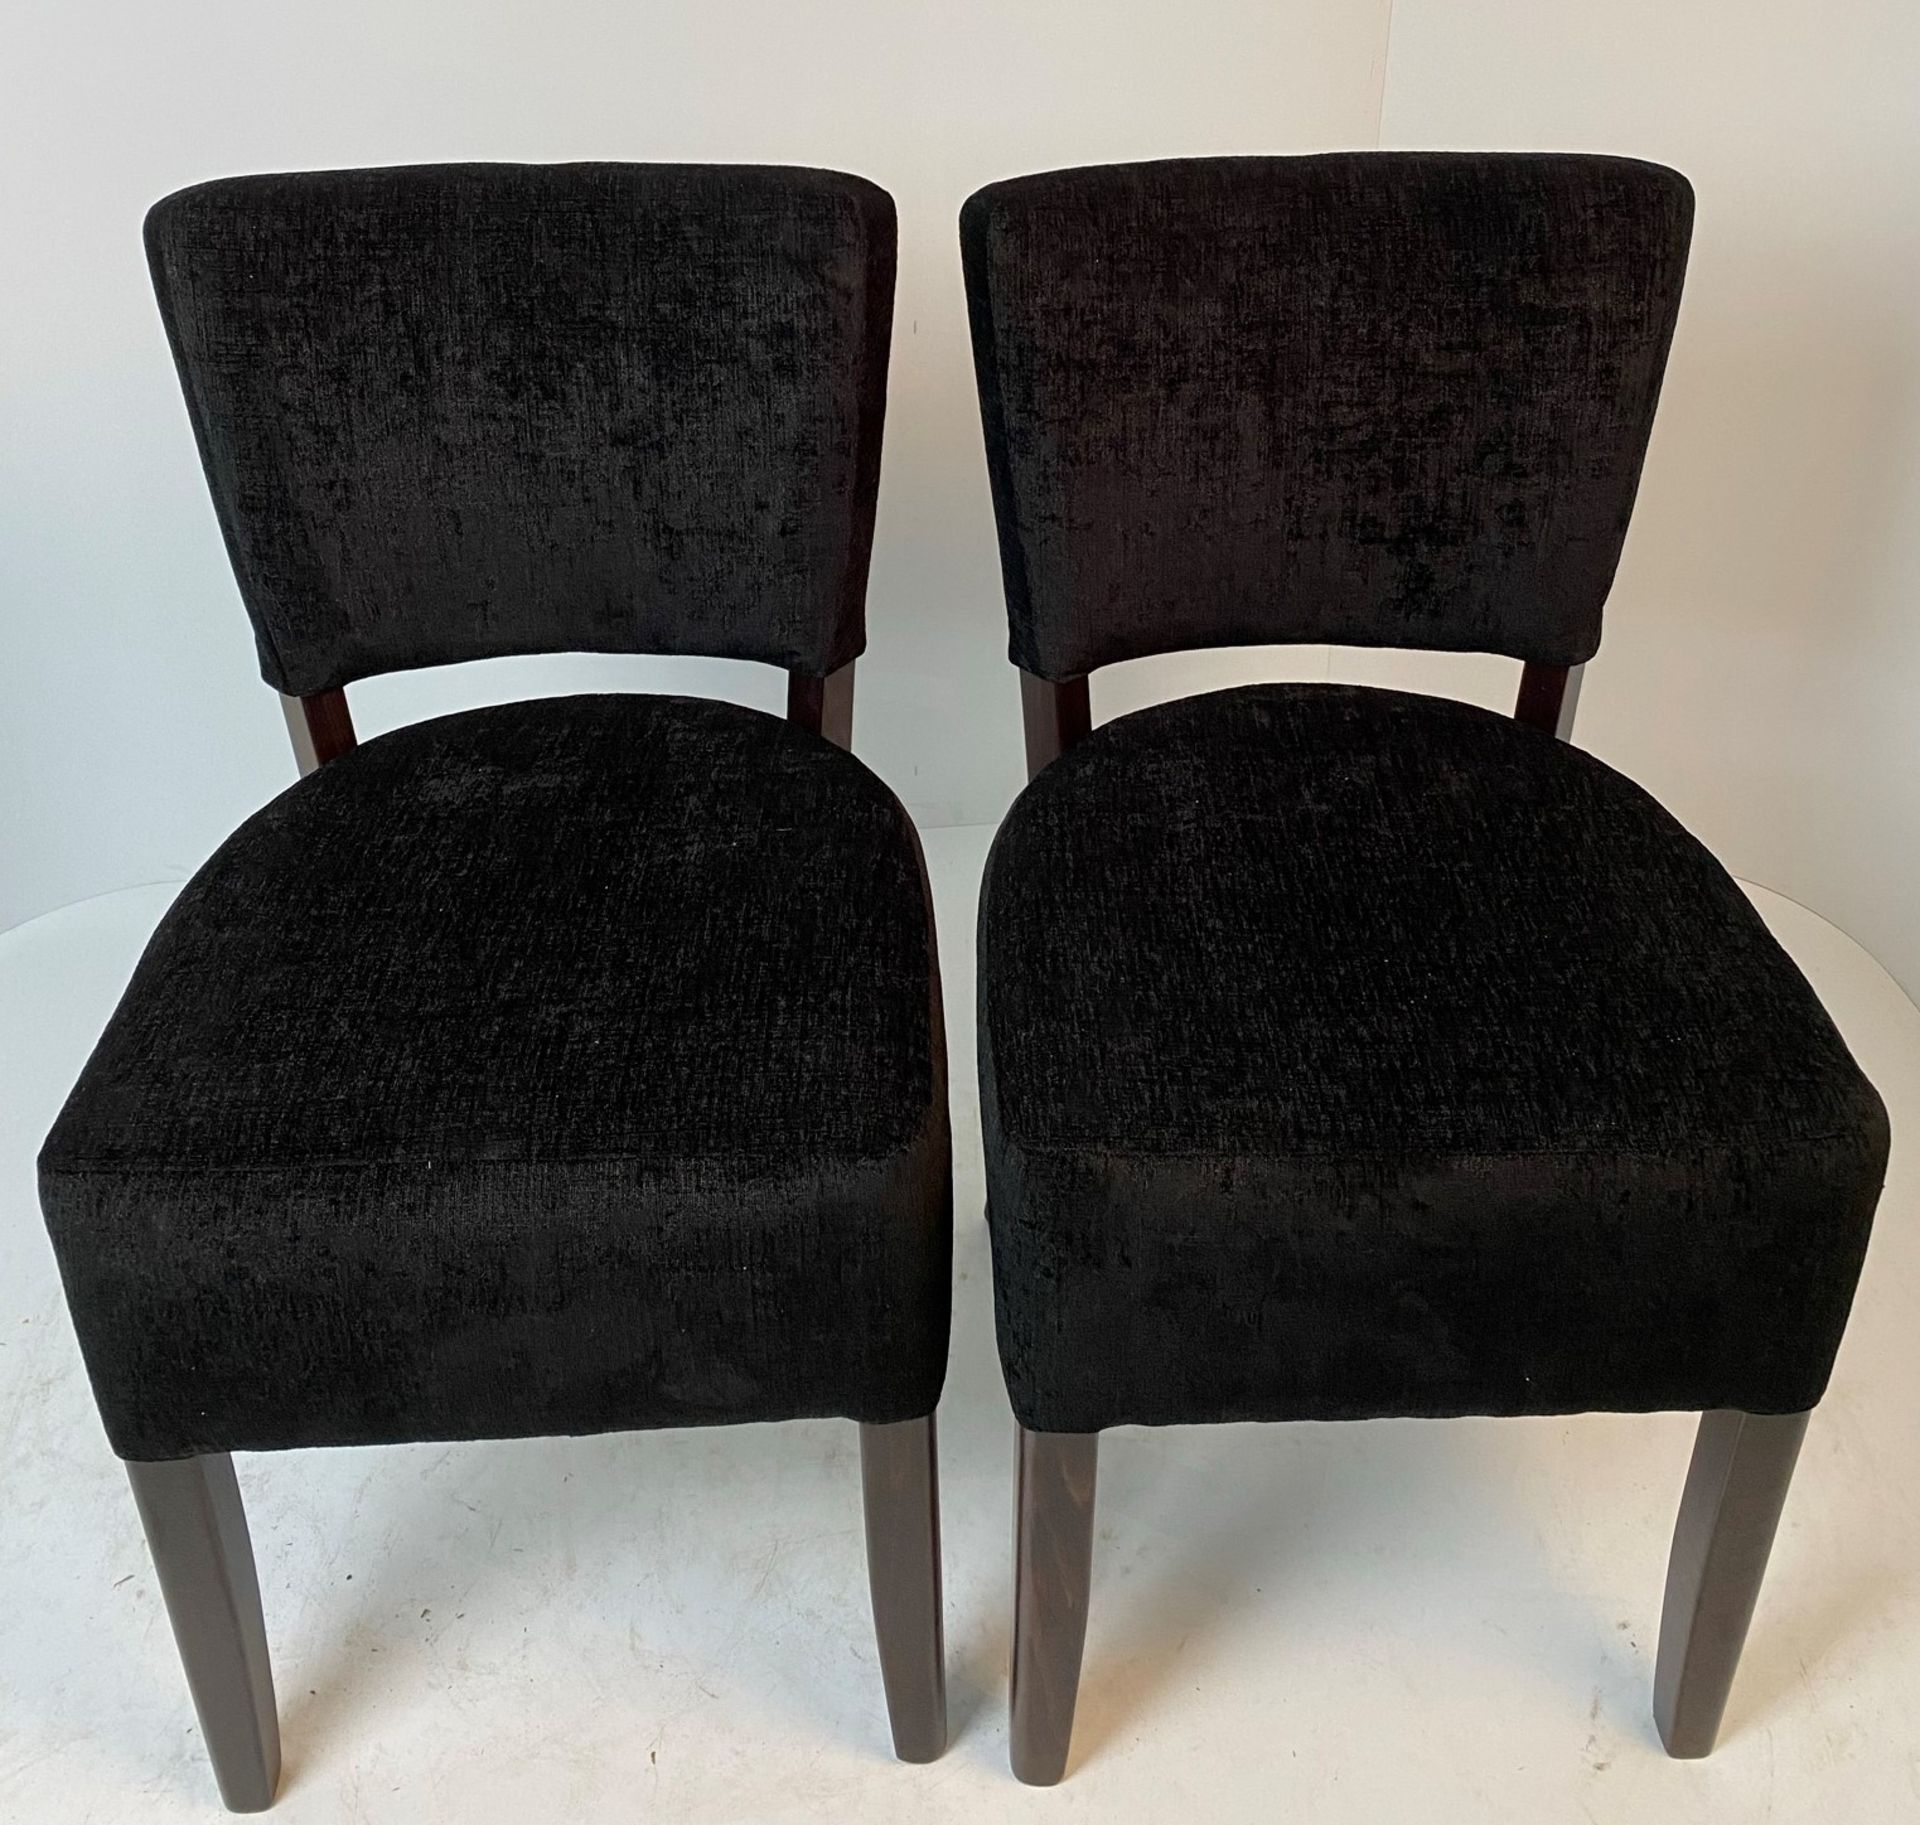 2 x Memphis Covertex Presto 724 Black side/dining chairs with walnut coloured frames